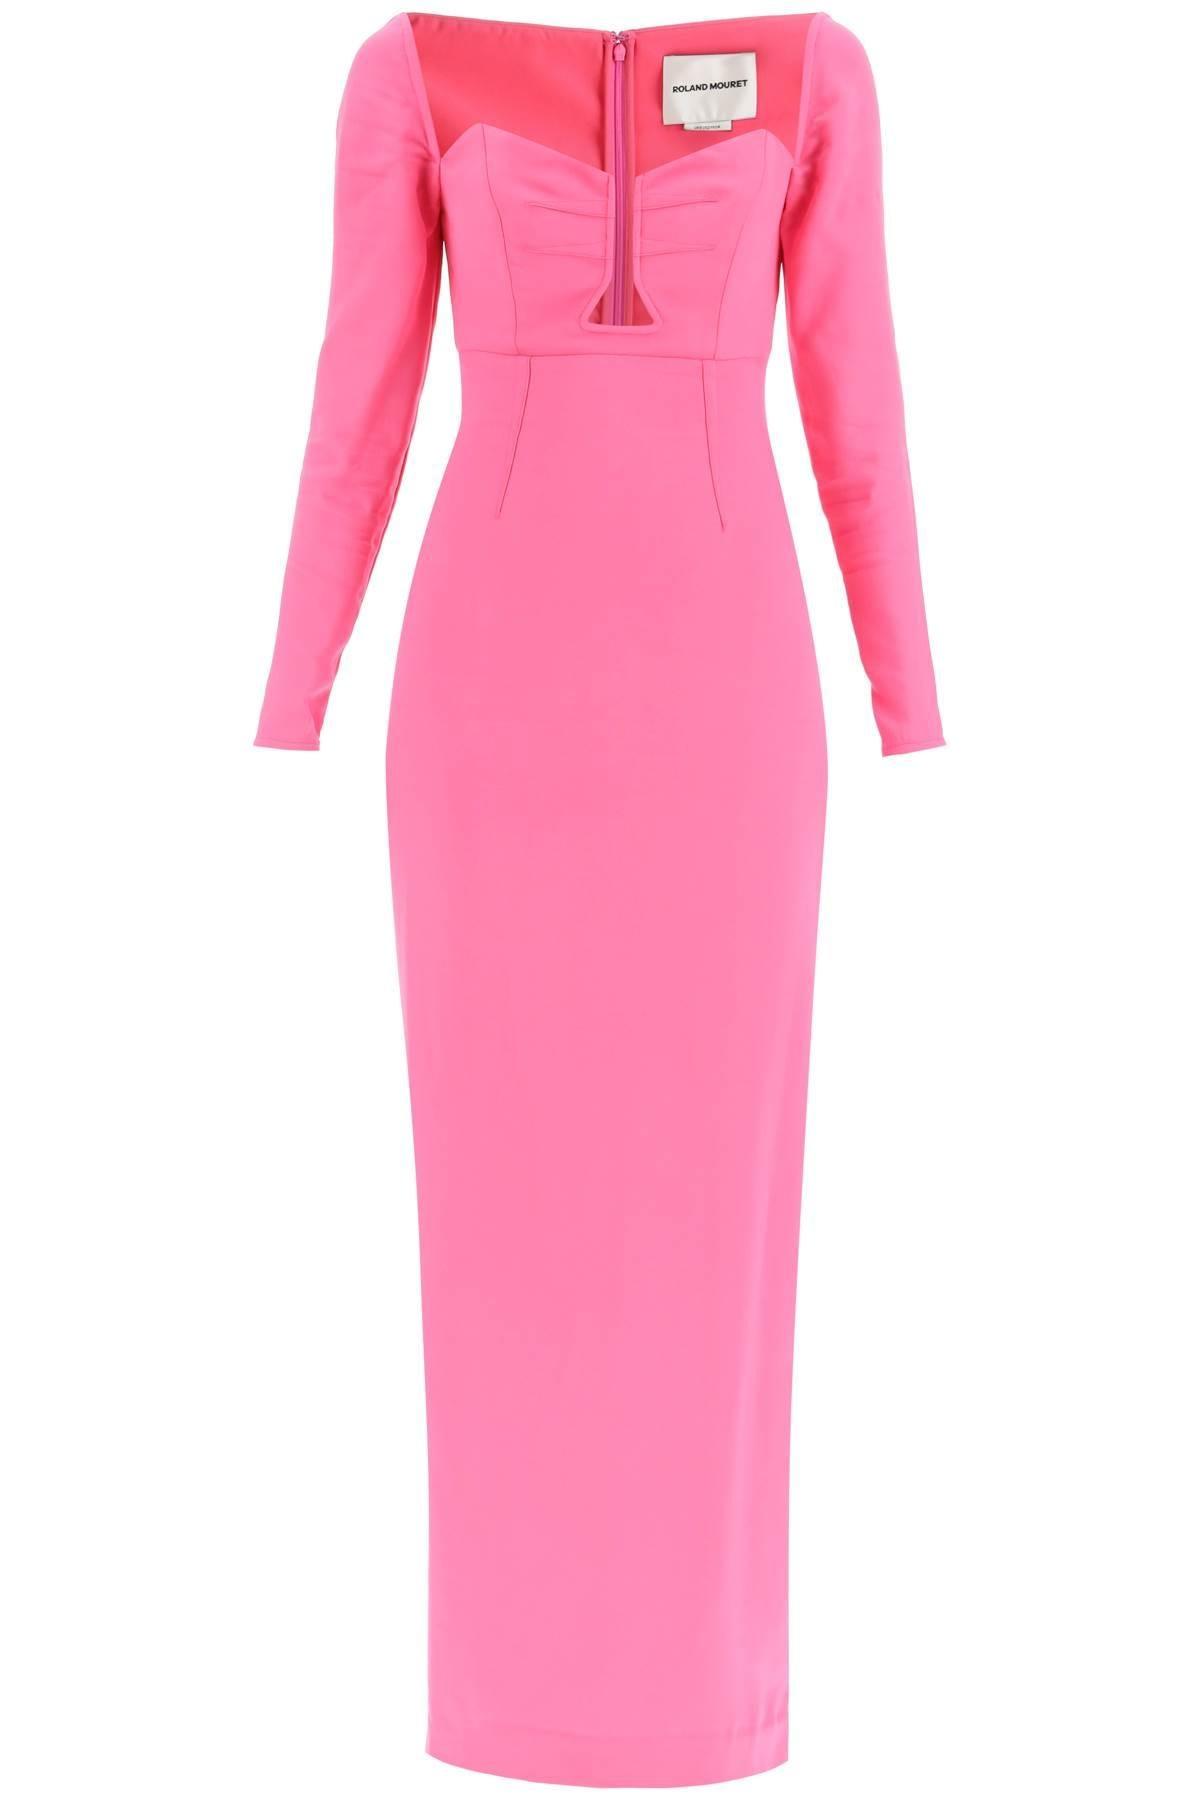 Roland Mouret Maxi Pencil Dress With Cut Outs in Pink | Lyst